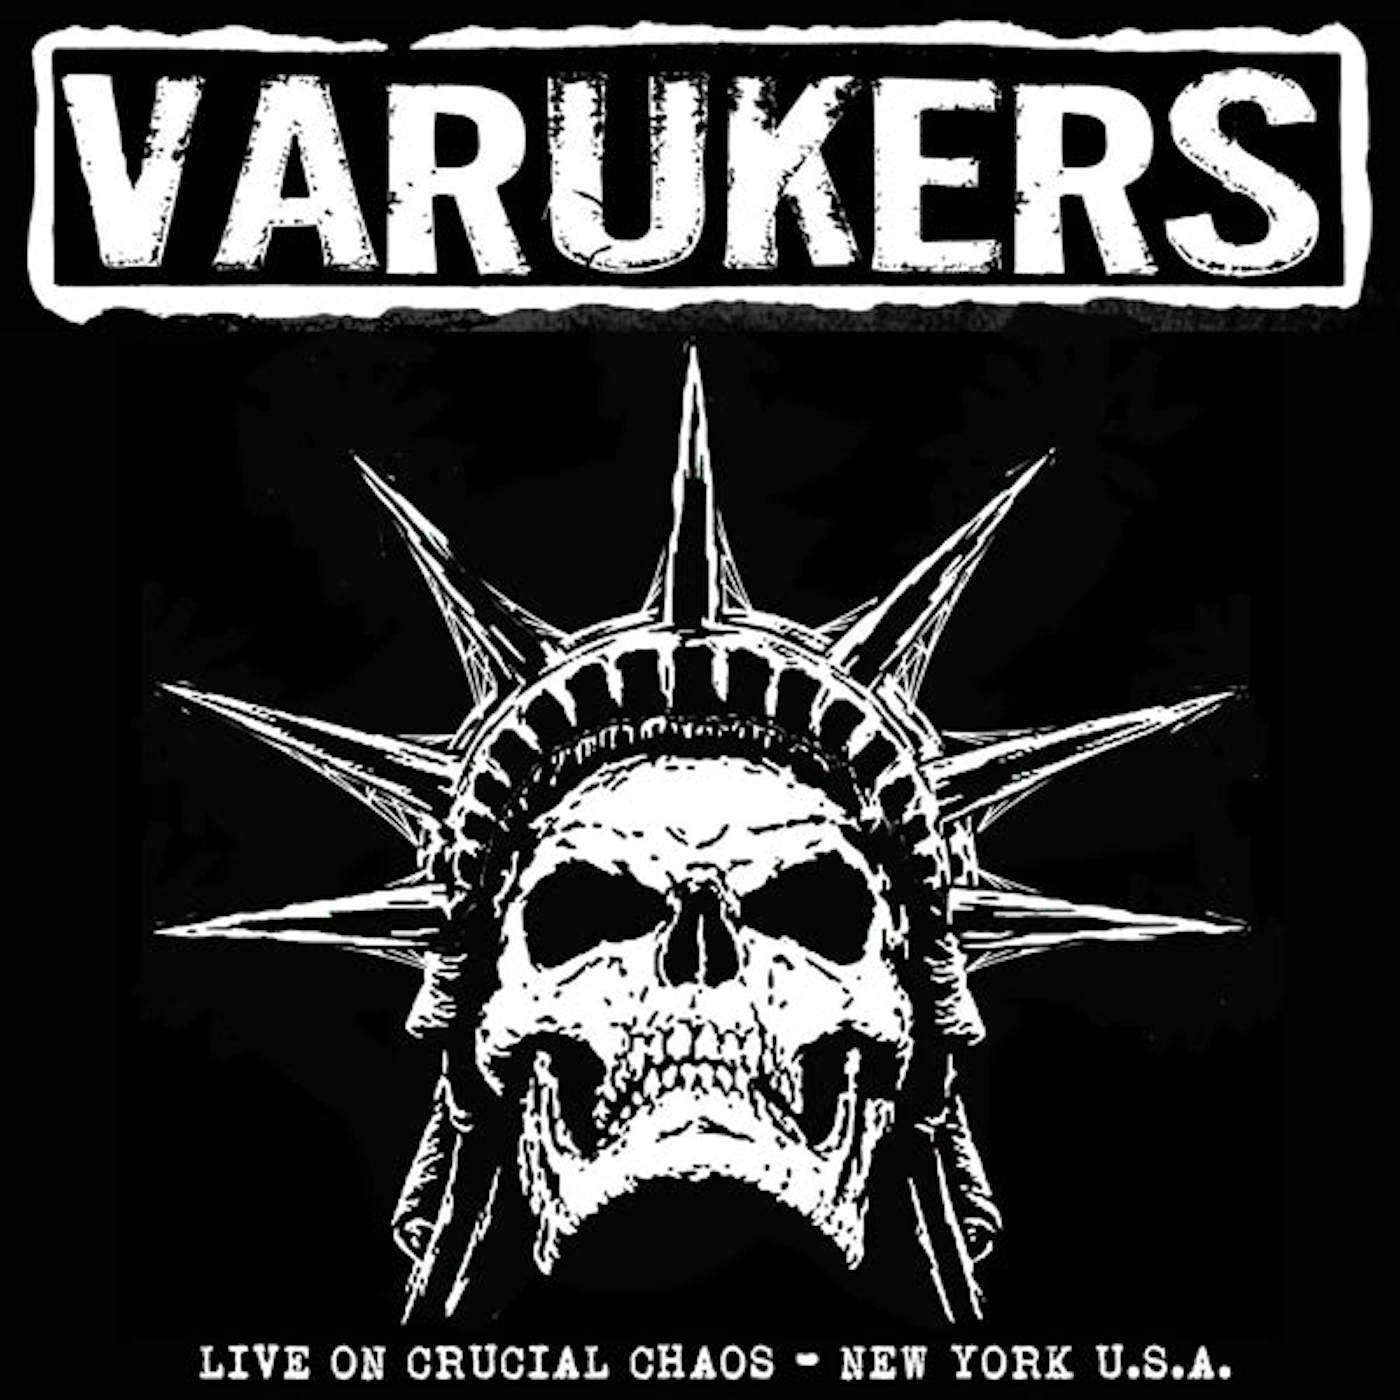 The Varukers LP - Live On Crucial Chaos - New York U.S.A. (Transparent Yellow Vinyl + Poster)